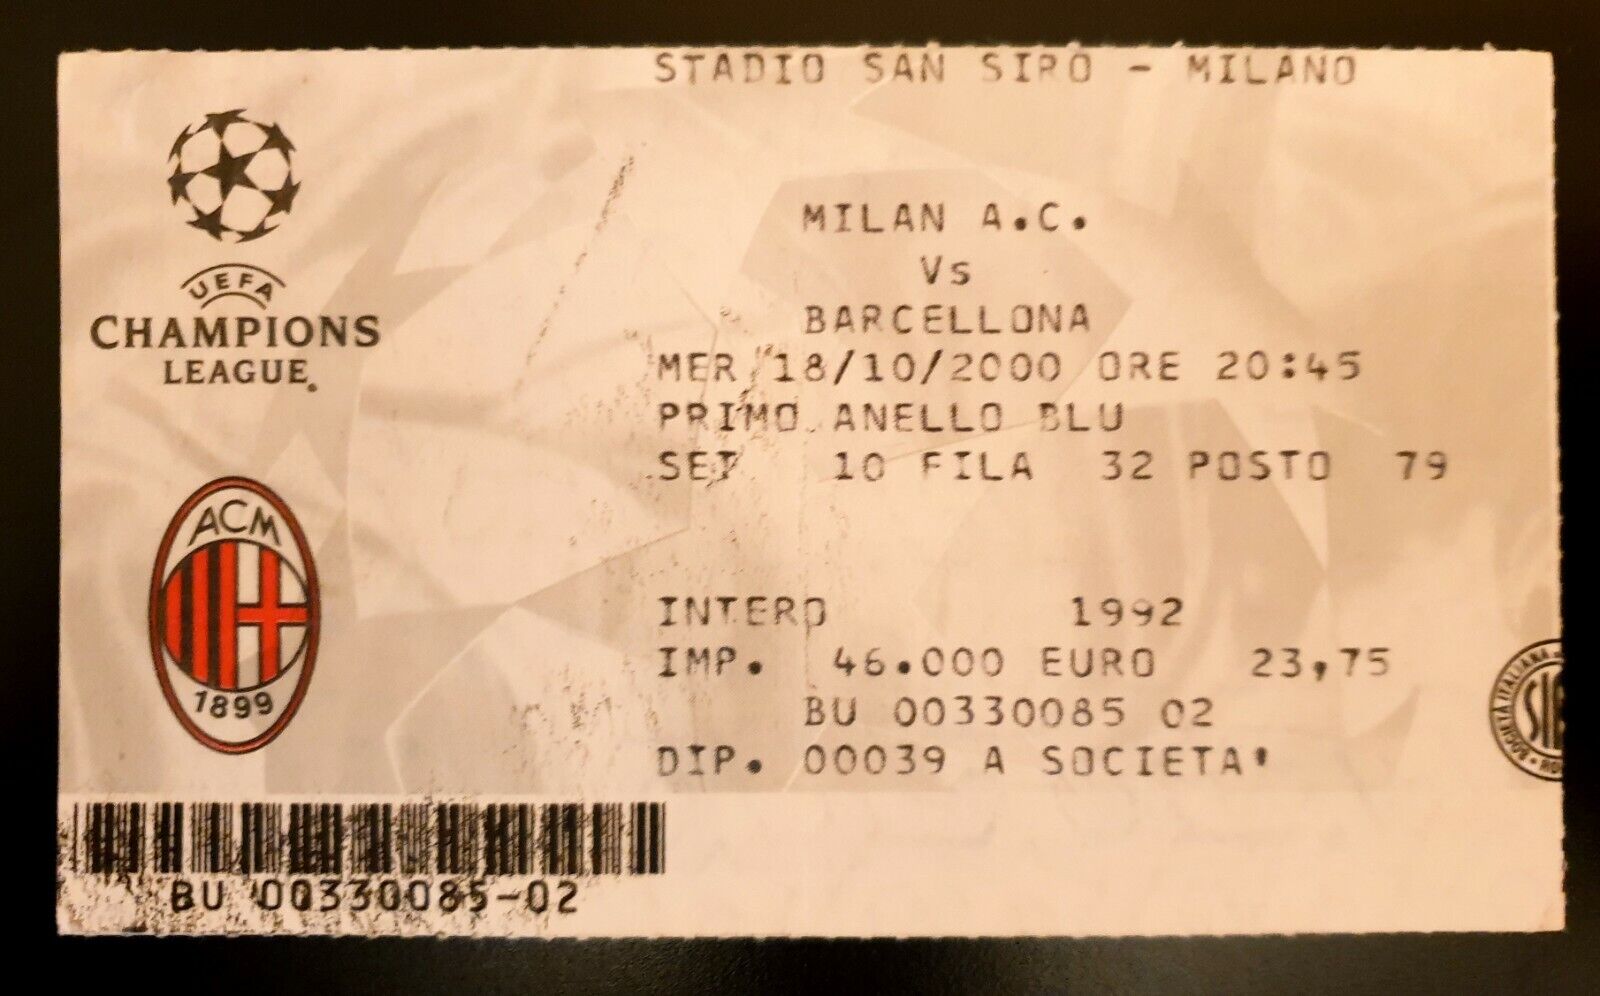 Rivaldo 's first and only hat-trick in CL ( AC Milan vs Barcelona 3:3) ticket